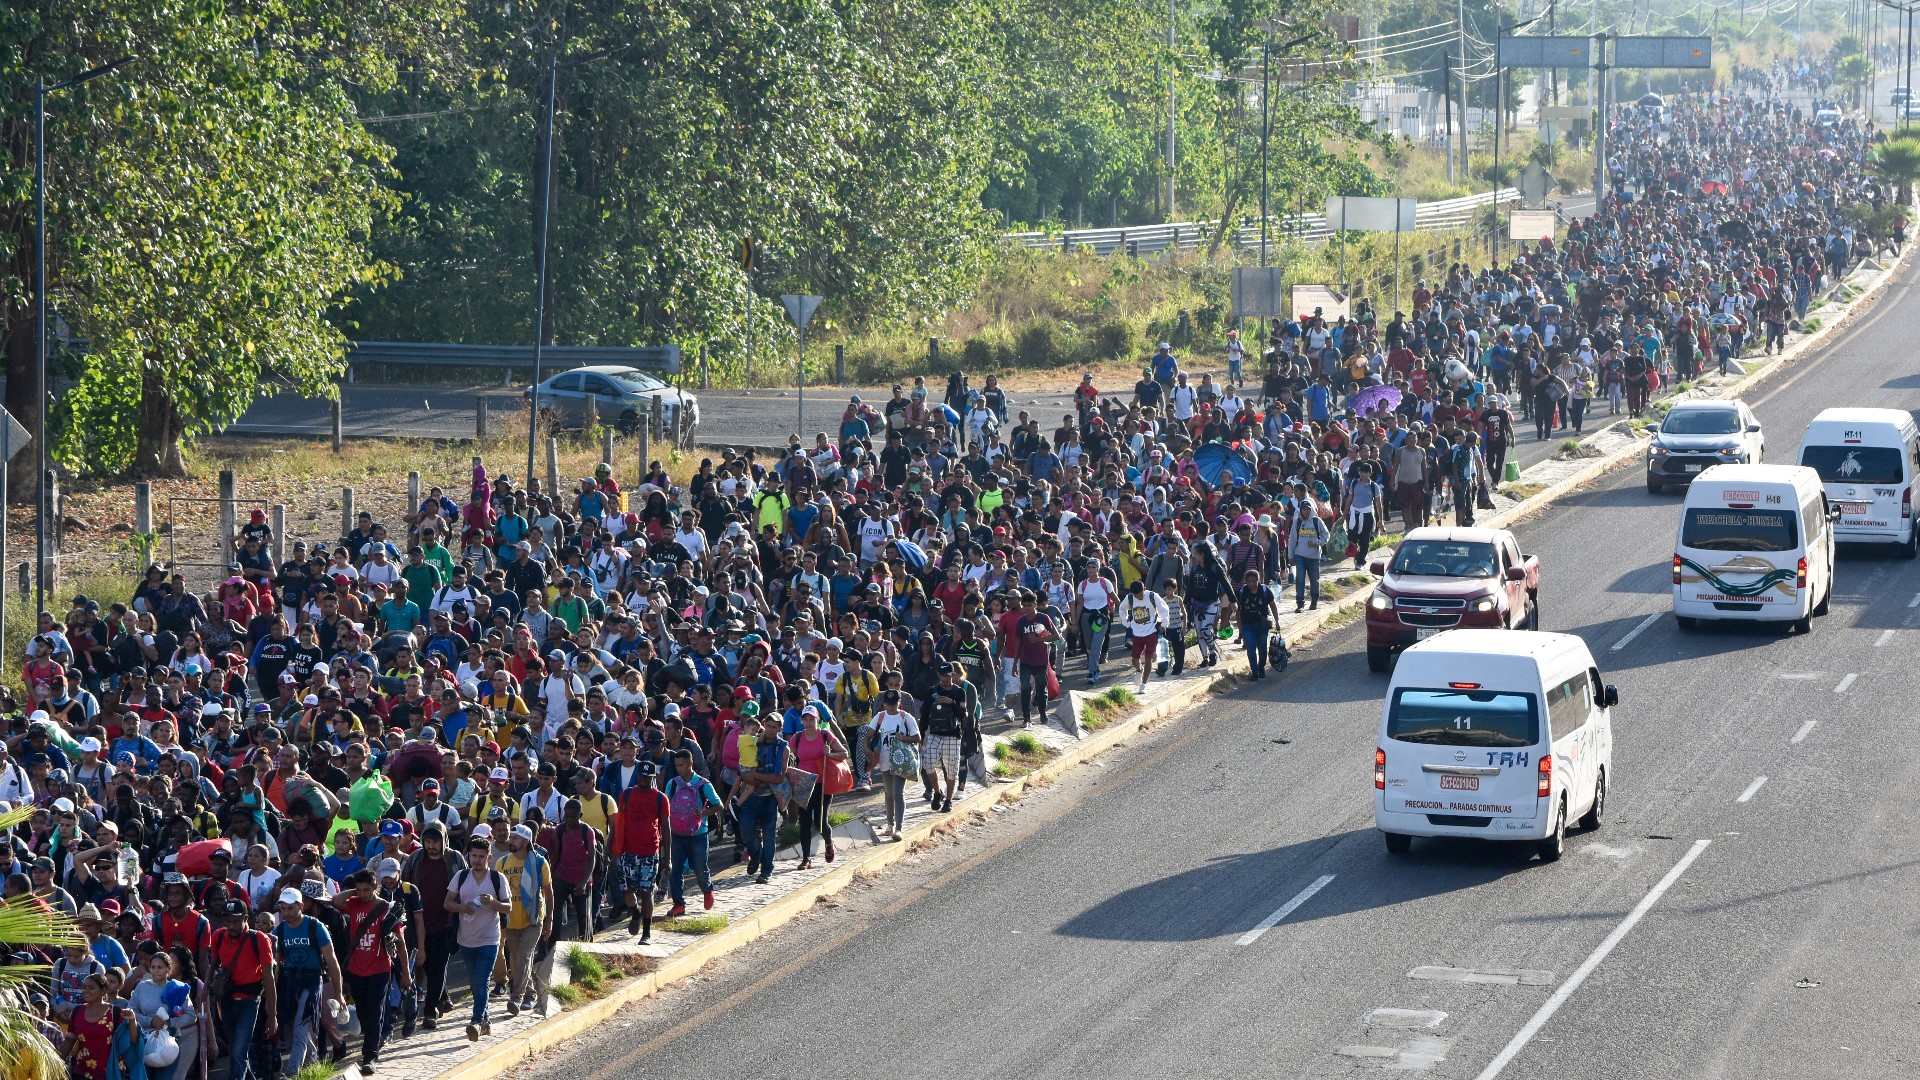 A sprawling caravan of migrants from Central America, Venezuela, Cuba and other countries trekked through Mexico on Monday, heading toward the U.S. border.